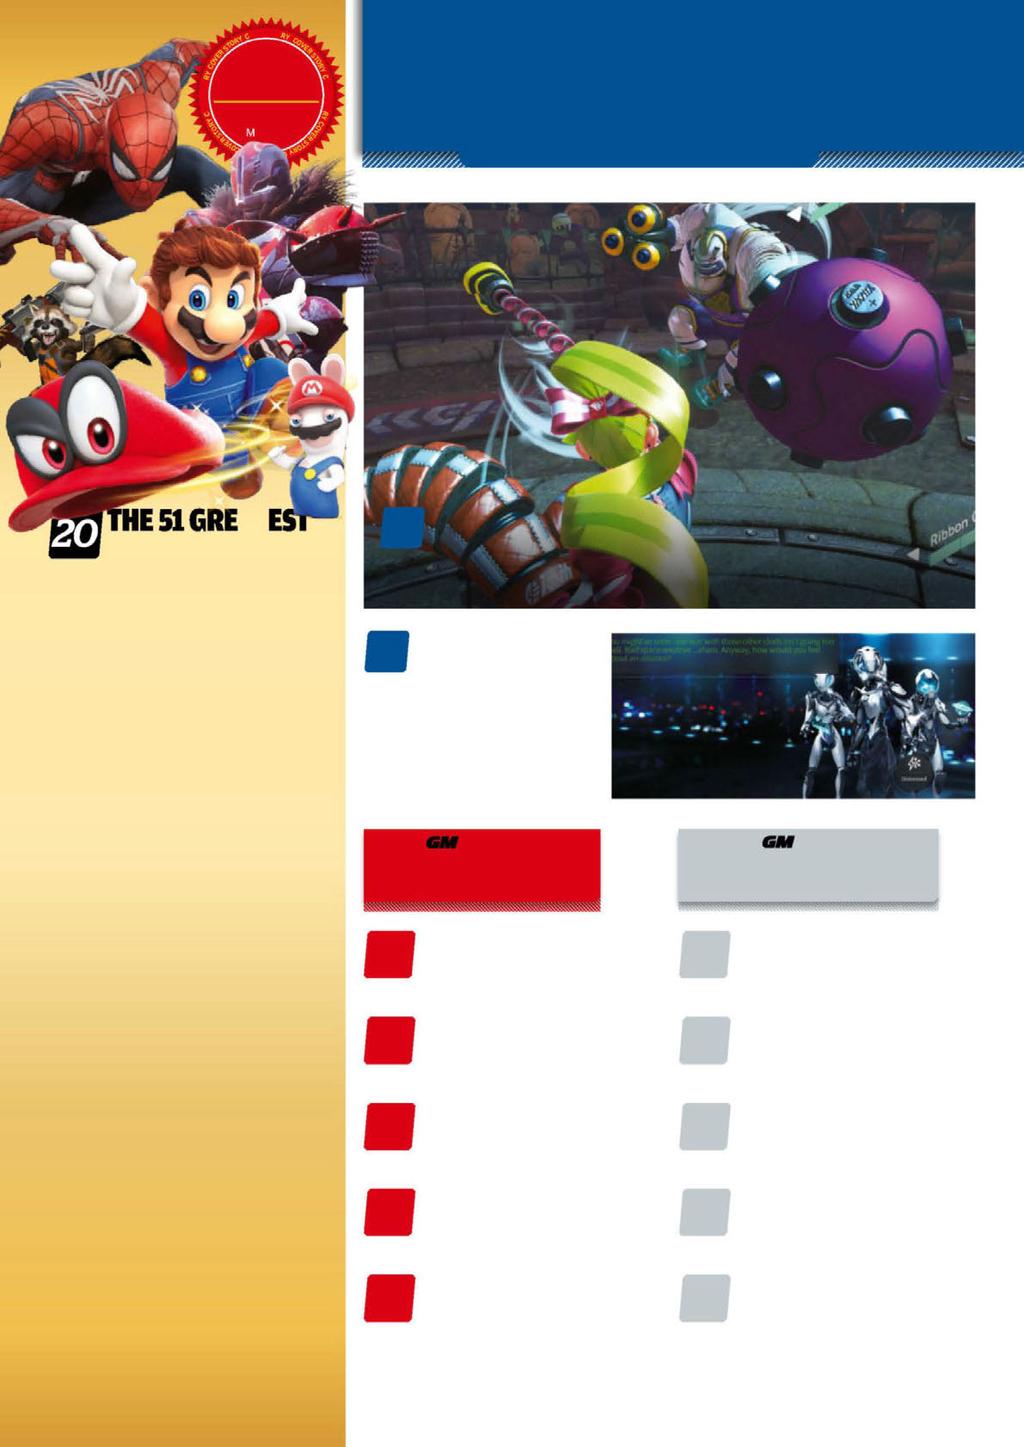 CovER story Only the best games are featured on GM s cover! ccover story cover story cover story cover story over story cover story cover story cover story Contents What s In Your Latest Issue?